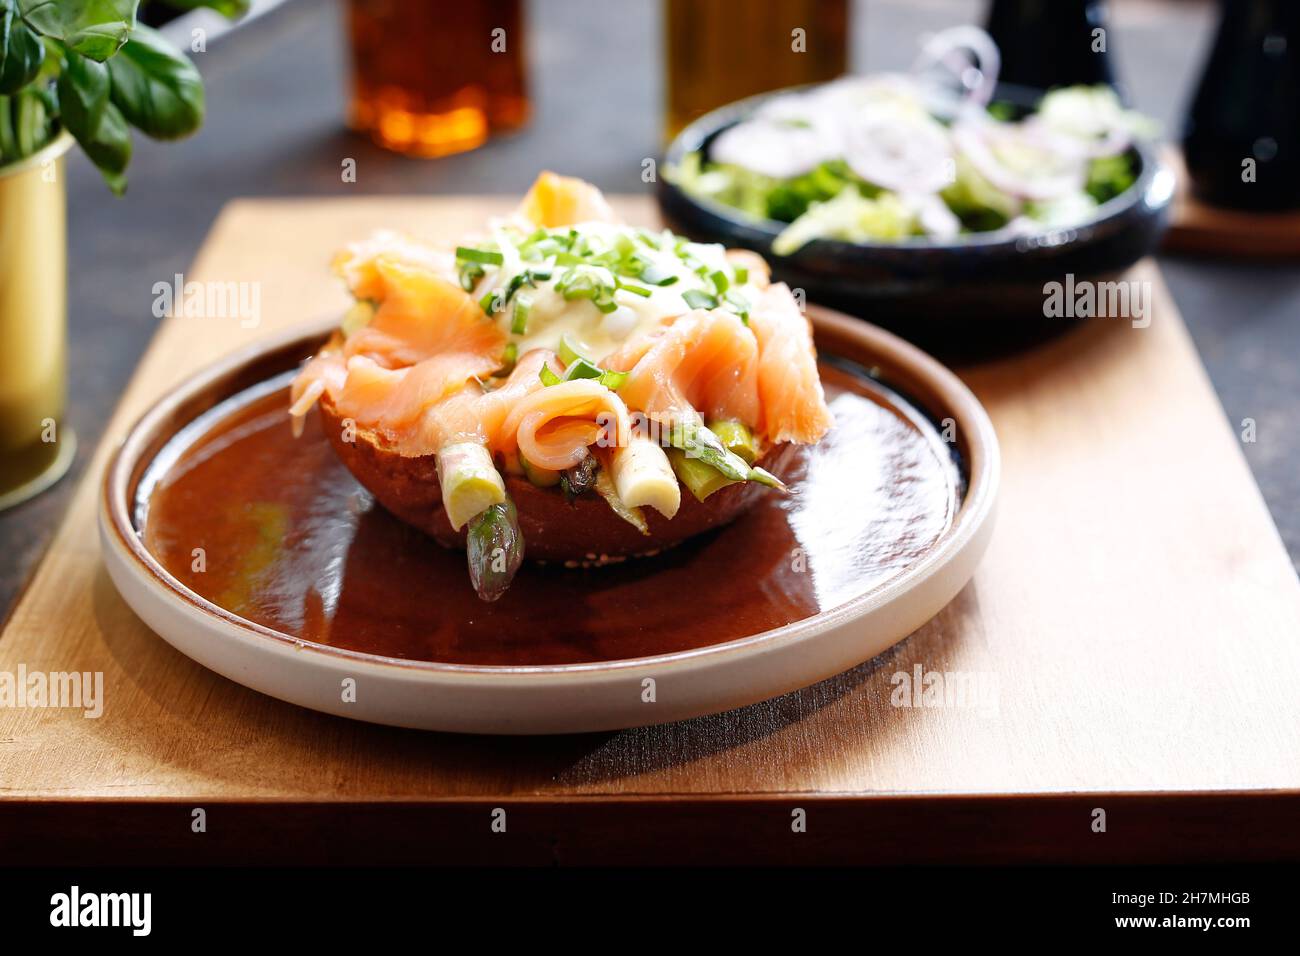 Sandwich with smoked salmon and asparagus, served with a green salad. A tasty dish.Culinary photography. Suggestion to serve the dish. Stock Photo